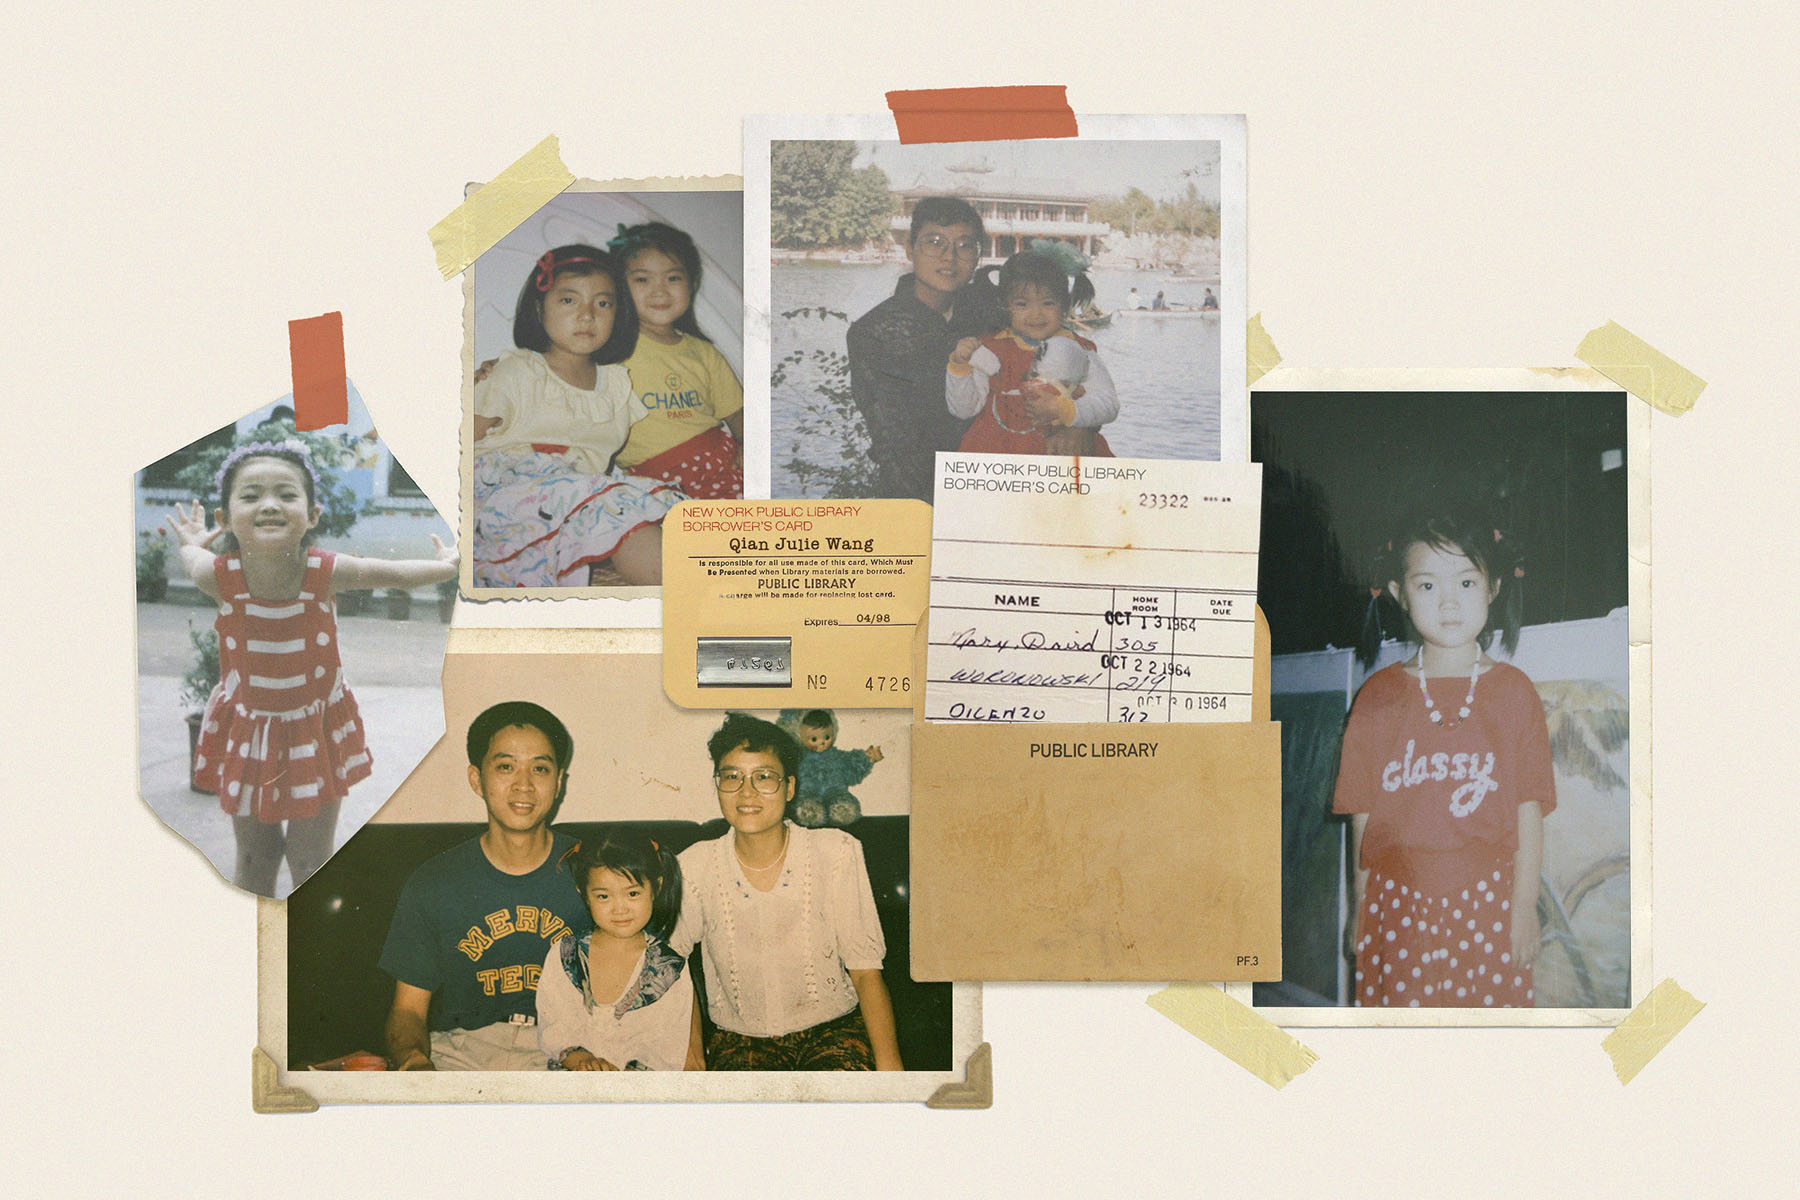 Photos of author Qian Julie Wang as a child with her family in New York City, arranged like a scrapbook against a cream background.